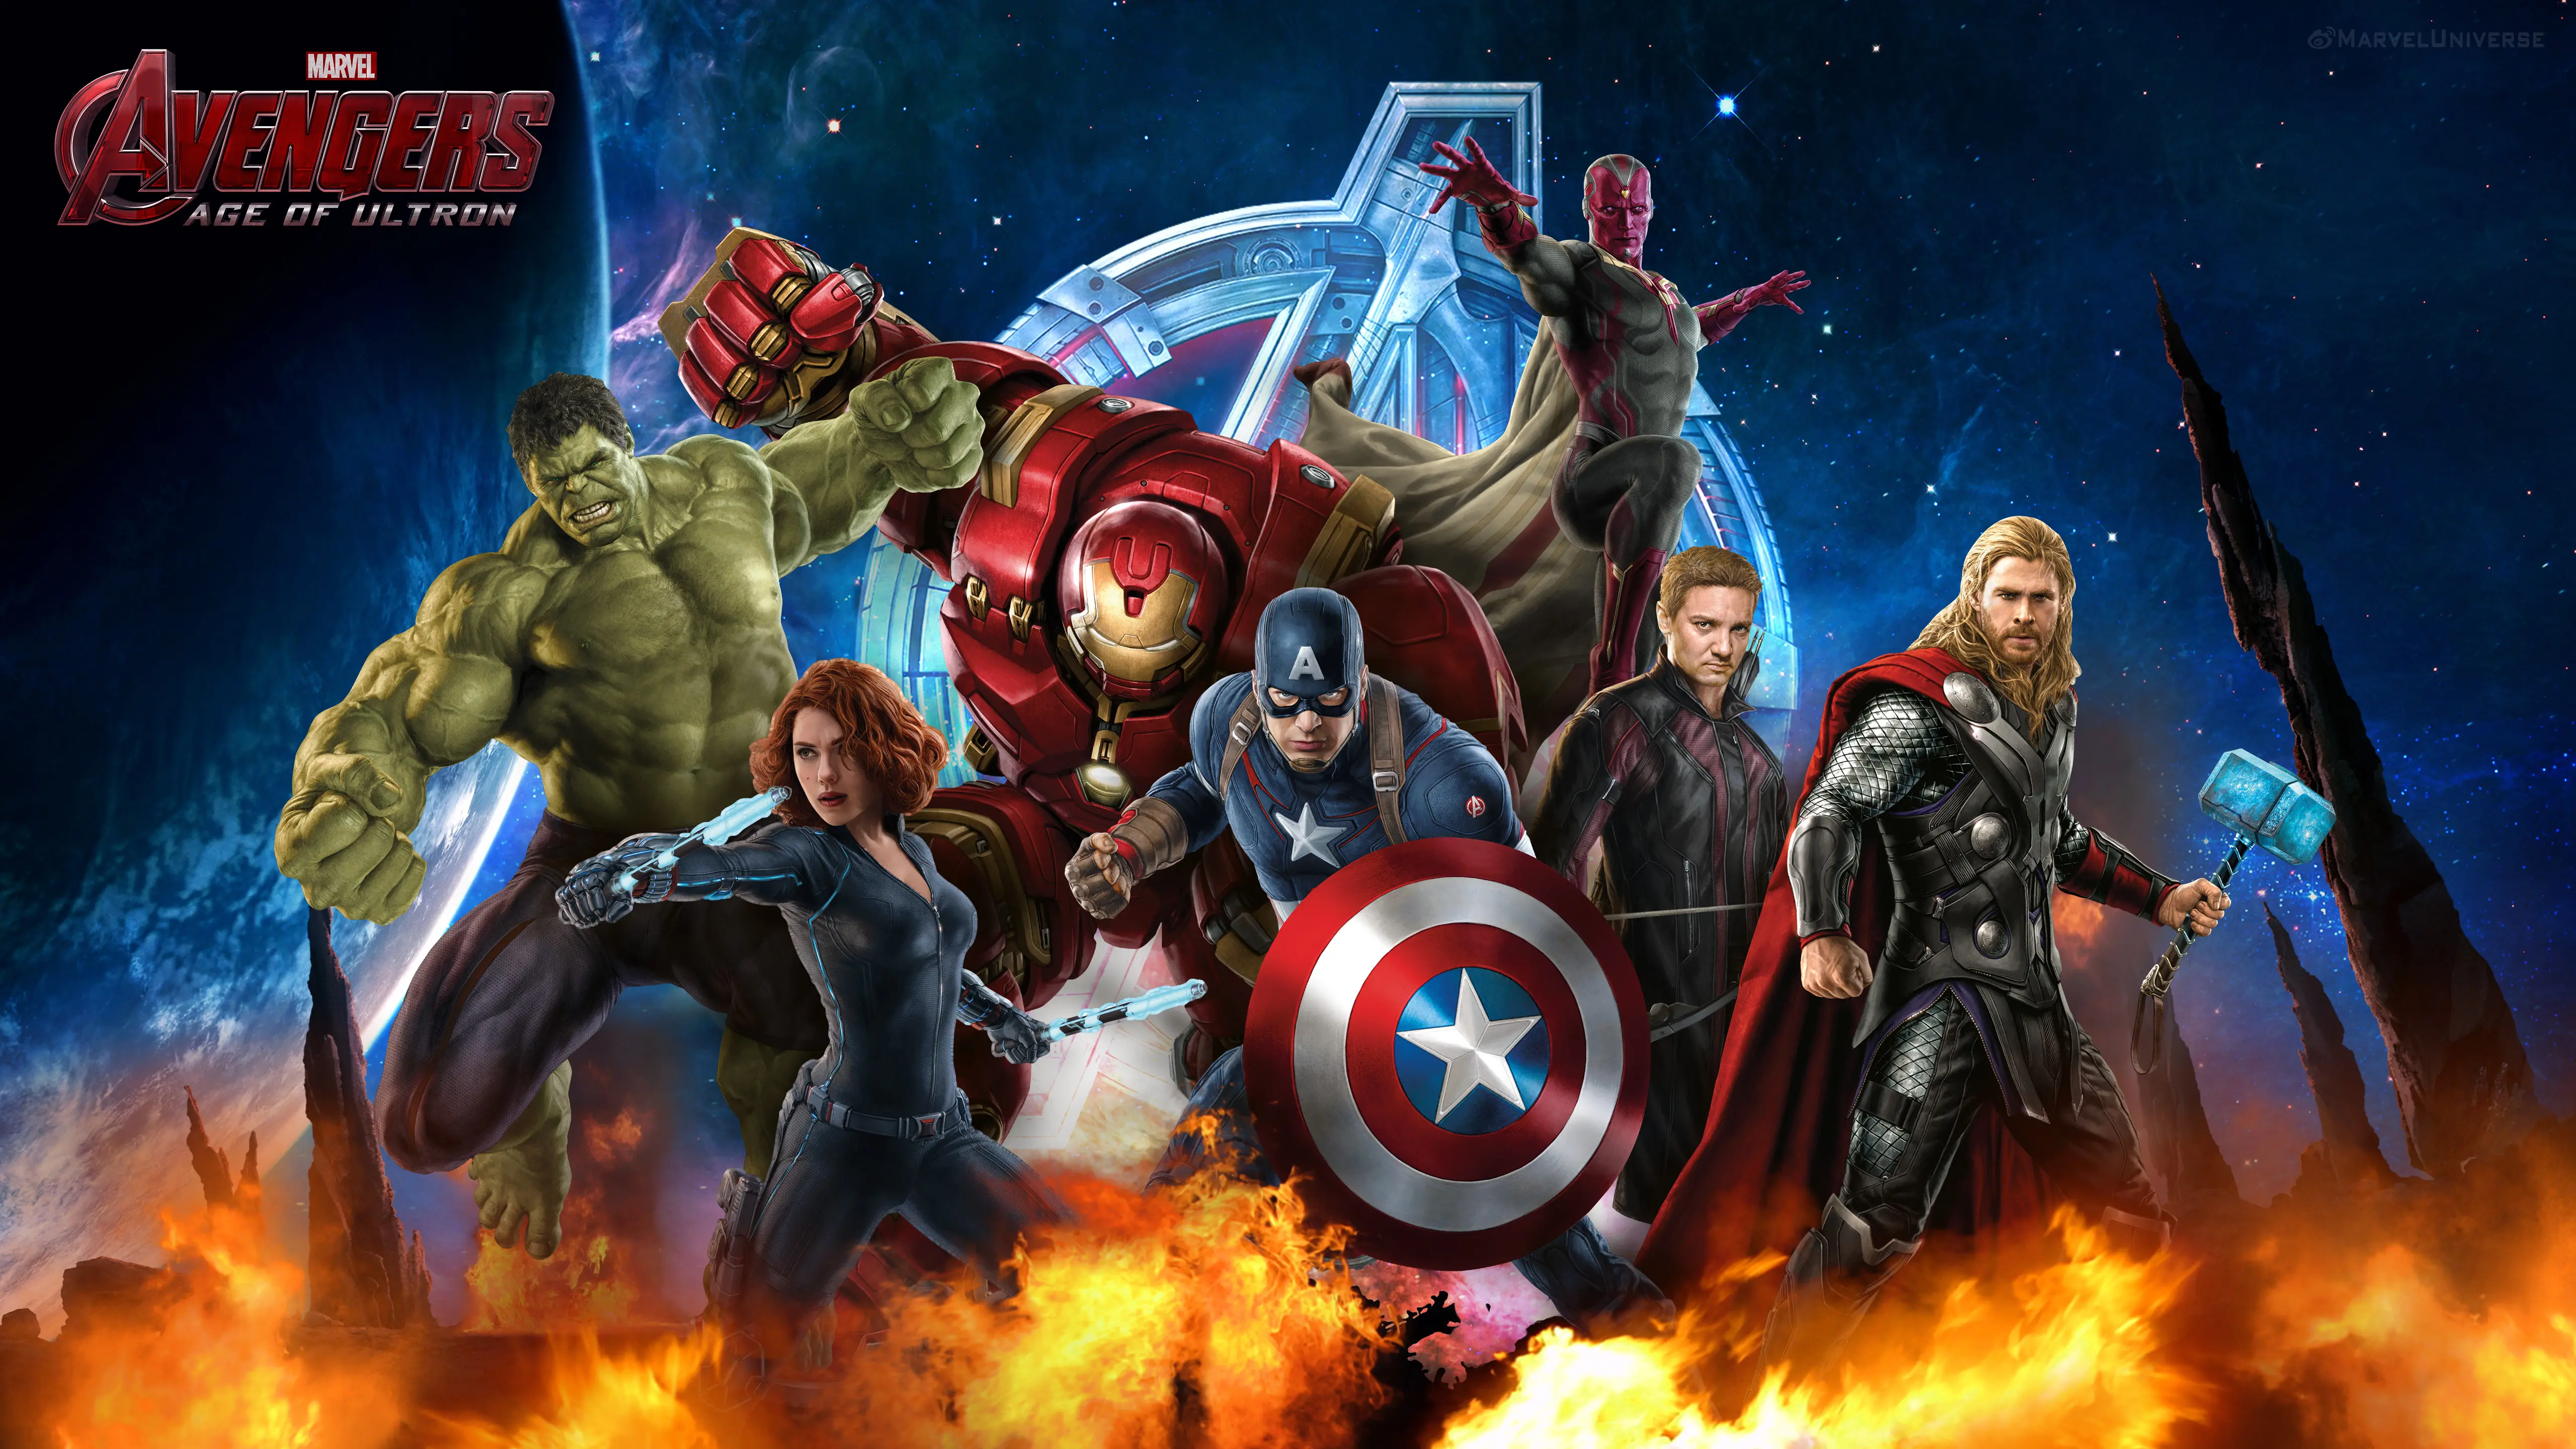 Movie Avengers Age of Ultron wallpaper 14 | Background Image